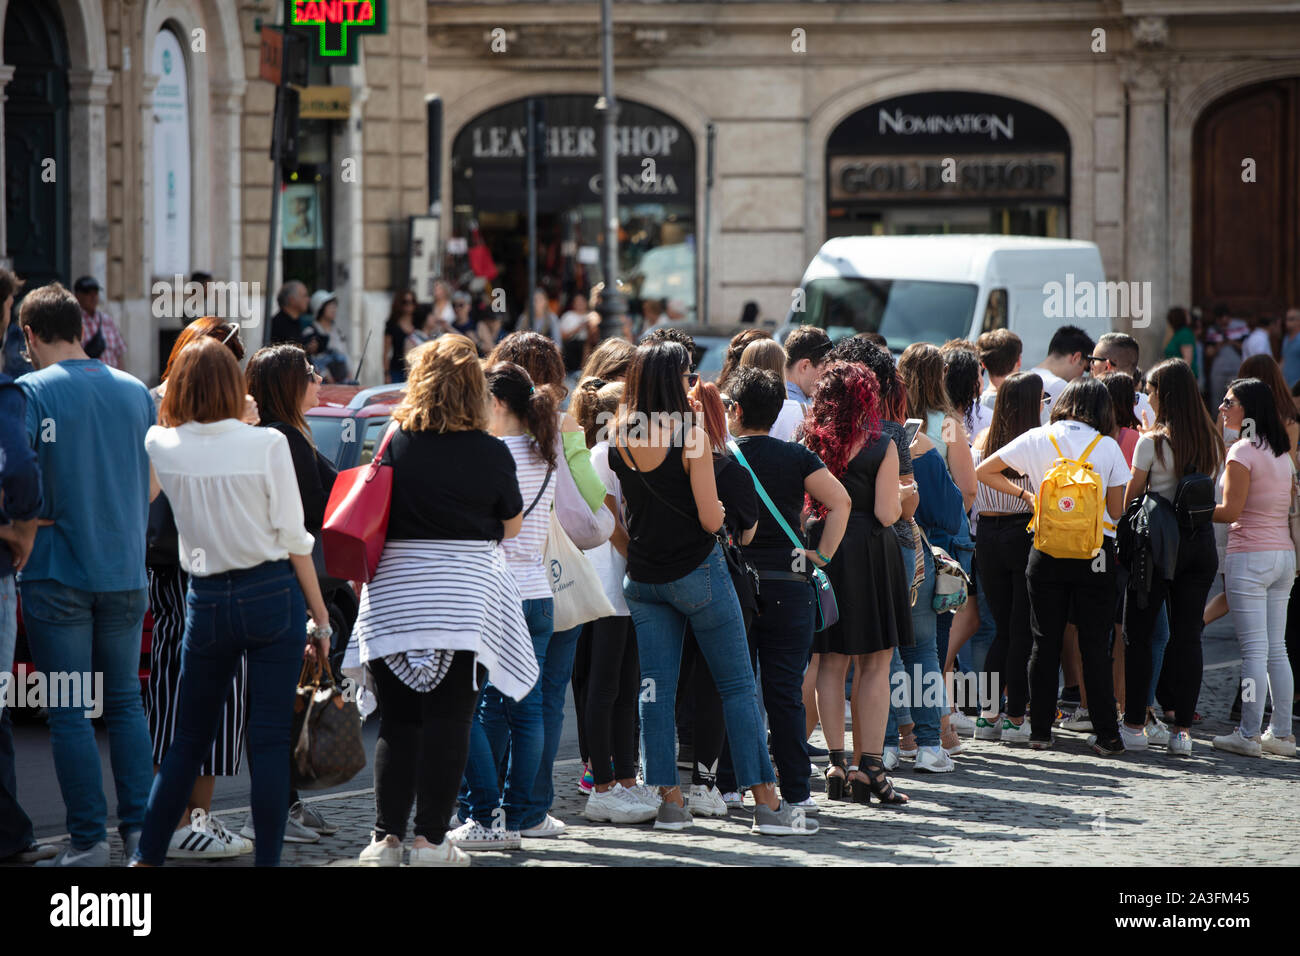 People in a queue on a street on a sunny day in Italy. Stock Photo